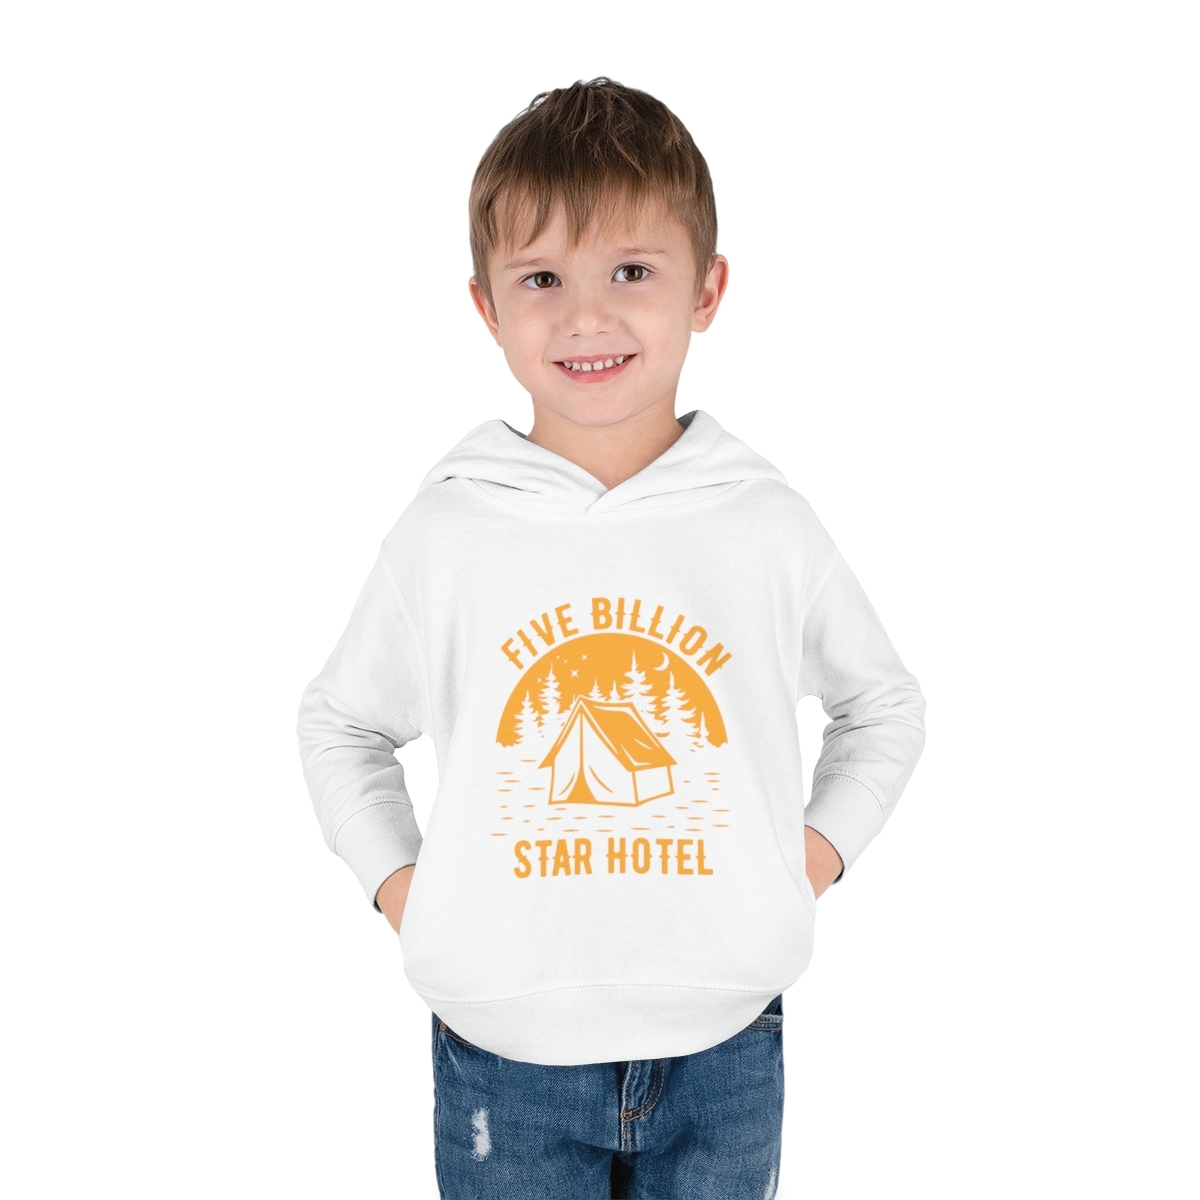 Primary image for Cozy Toddler Pullover Fleece Hoodie: Comfort and Durability for Young Adventurer